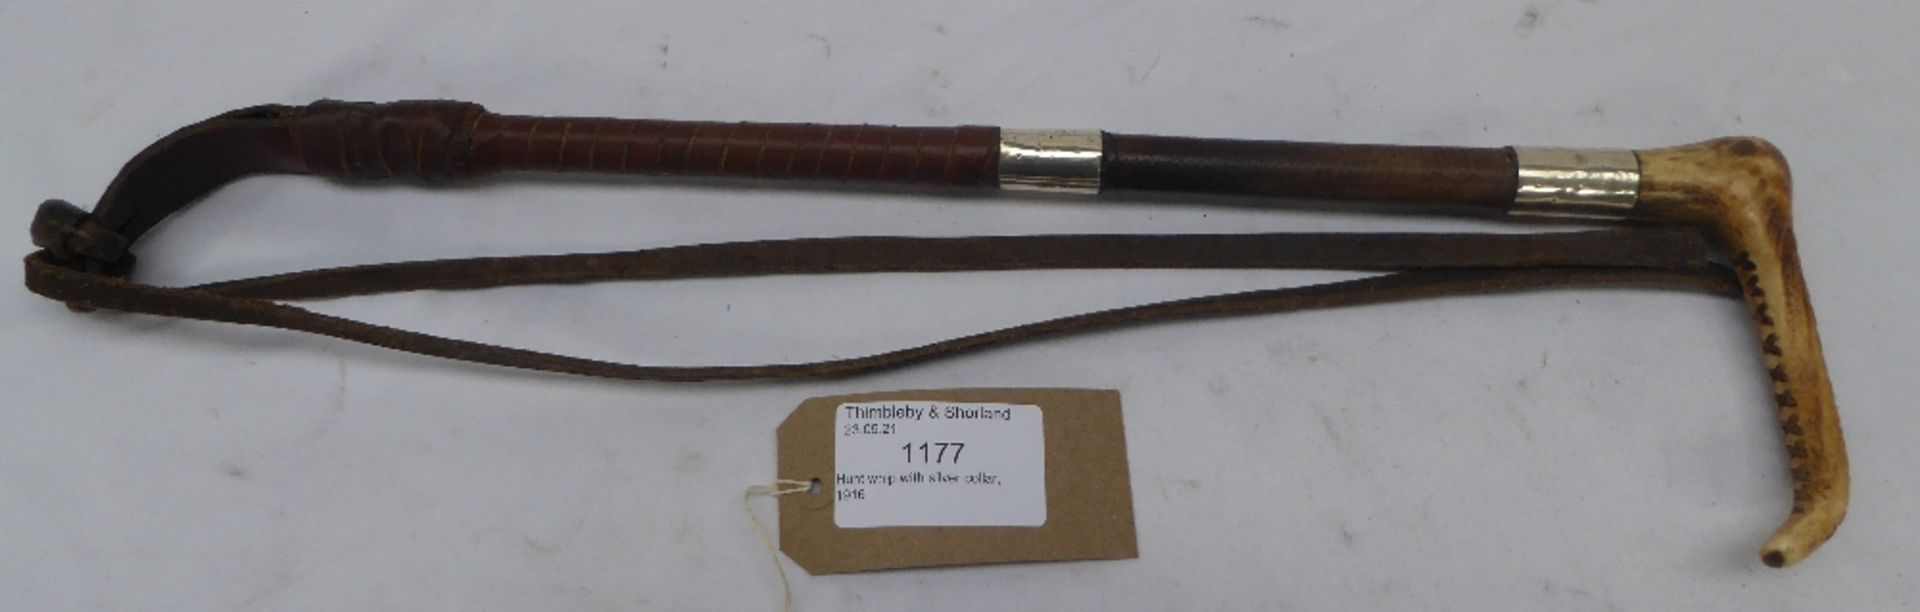 Hunt whip with silver collar stamped 'H.C. 1916 Schomberg, London', with a bone handle